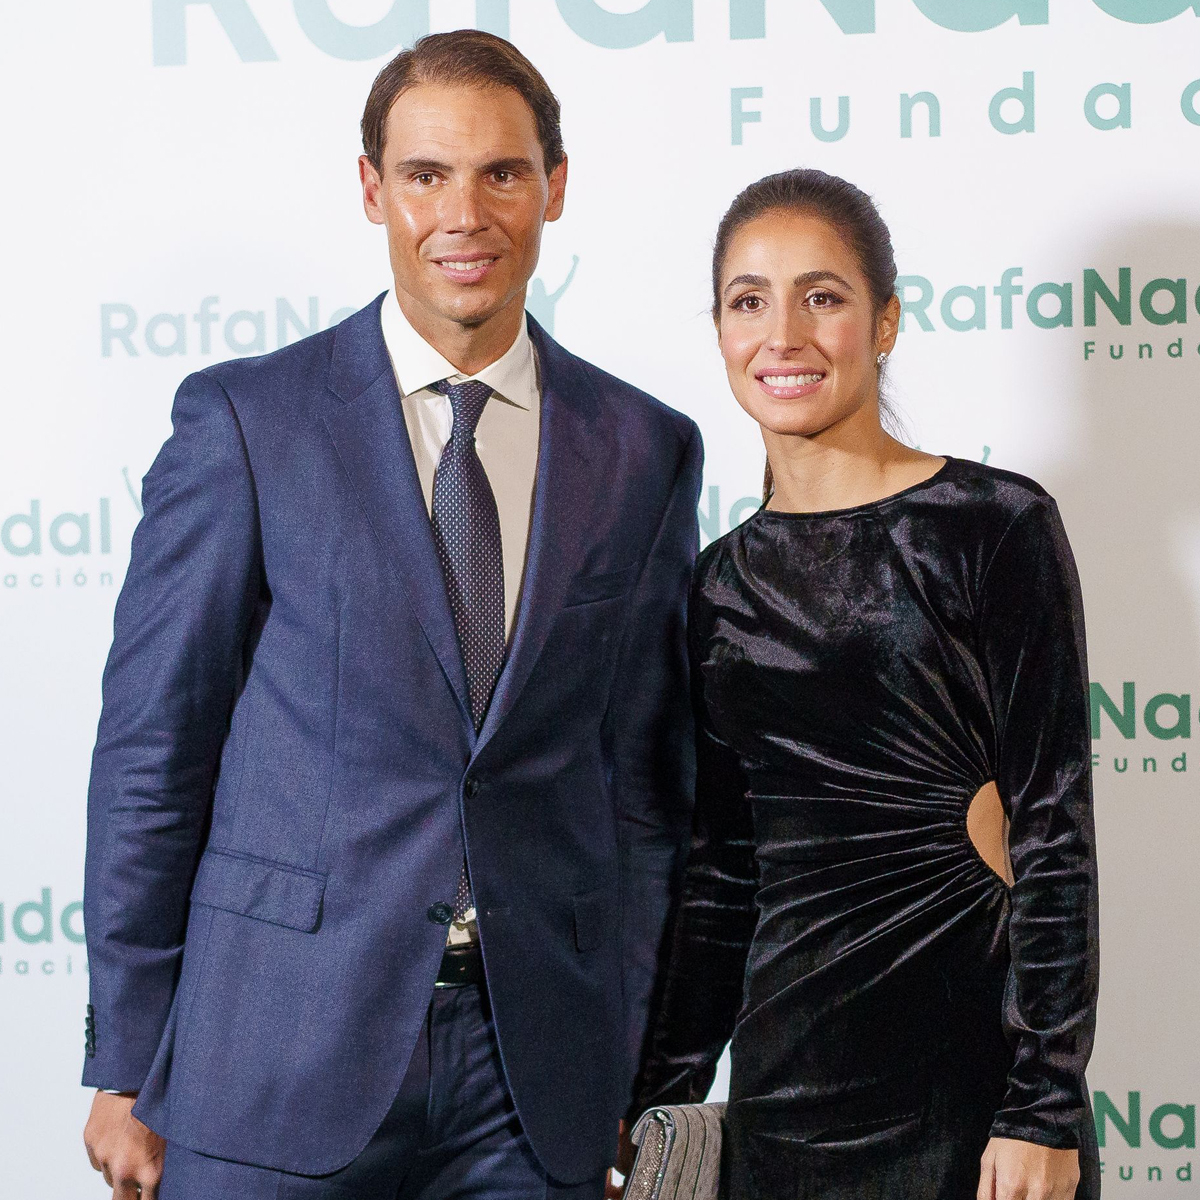 Tennis Star Rafael Nadal Confirms He and Wife Mery Are Expecting Baby